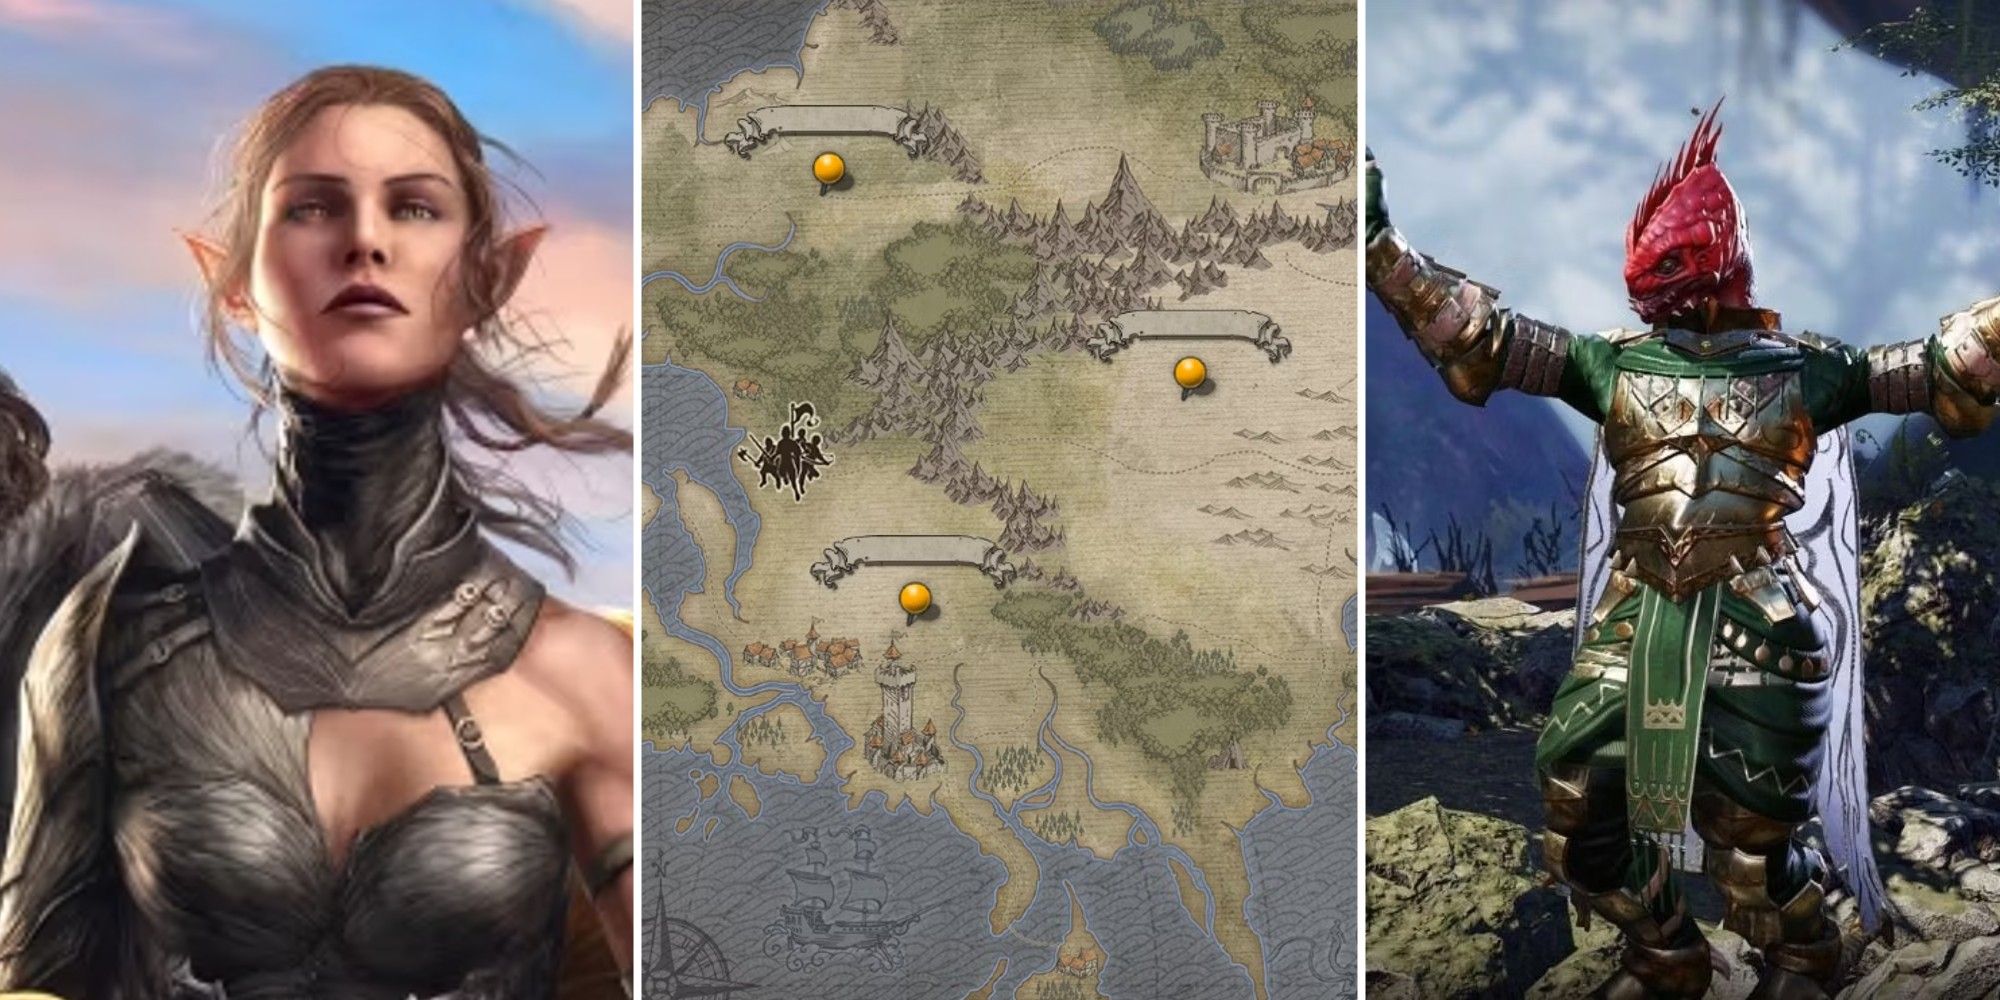 A collage showing a female character, a map, and a red lizard.